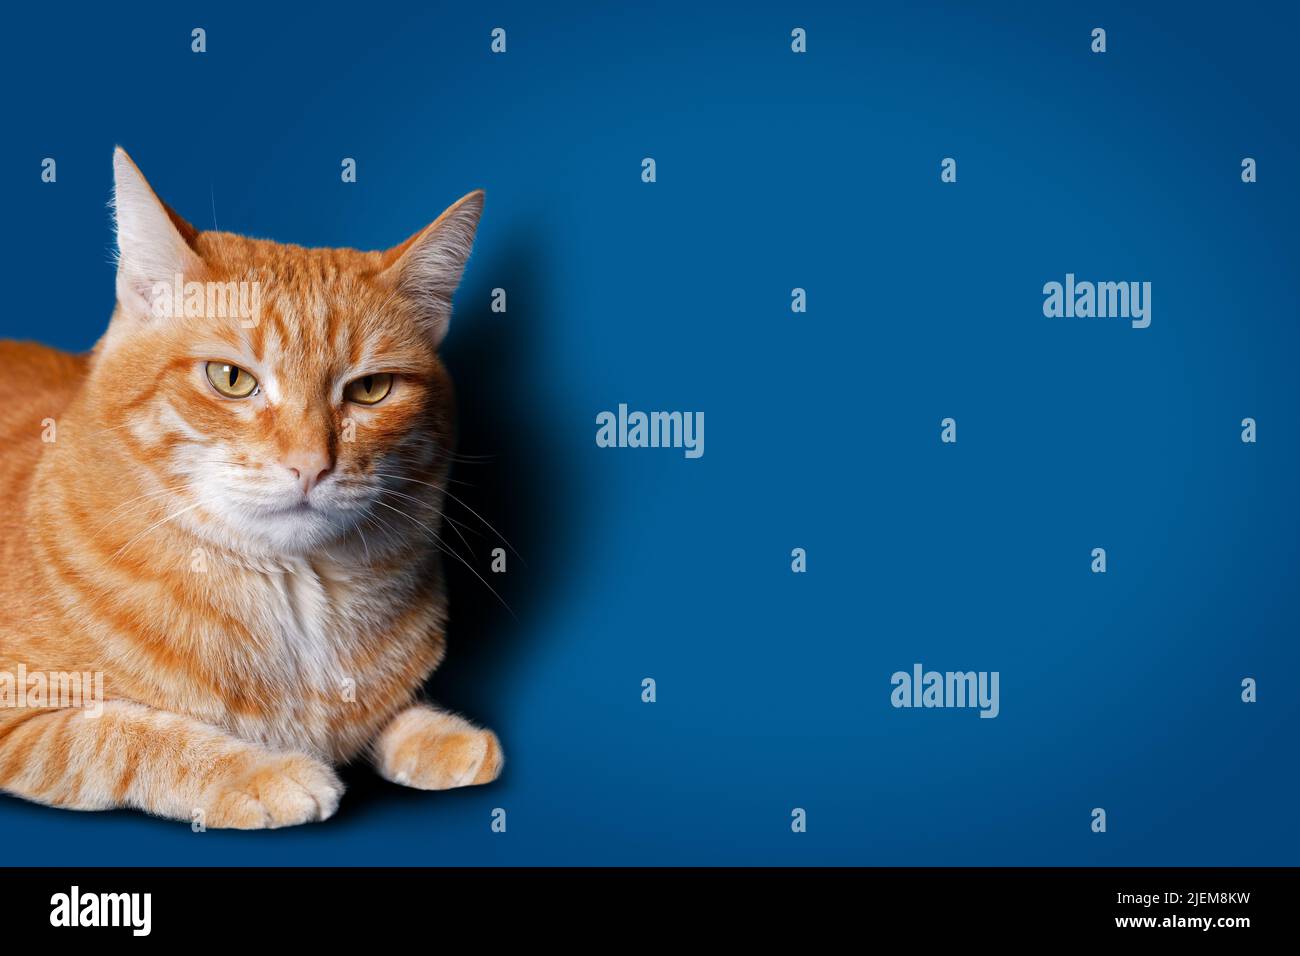 Closeup portrait of ginger cat on blue background with shadow. Copyspace. Stock Photo